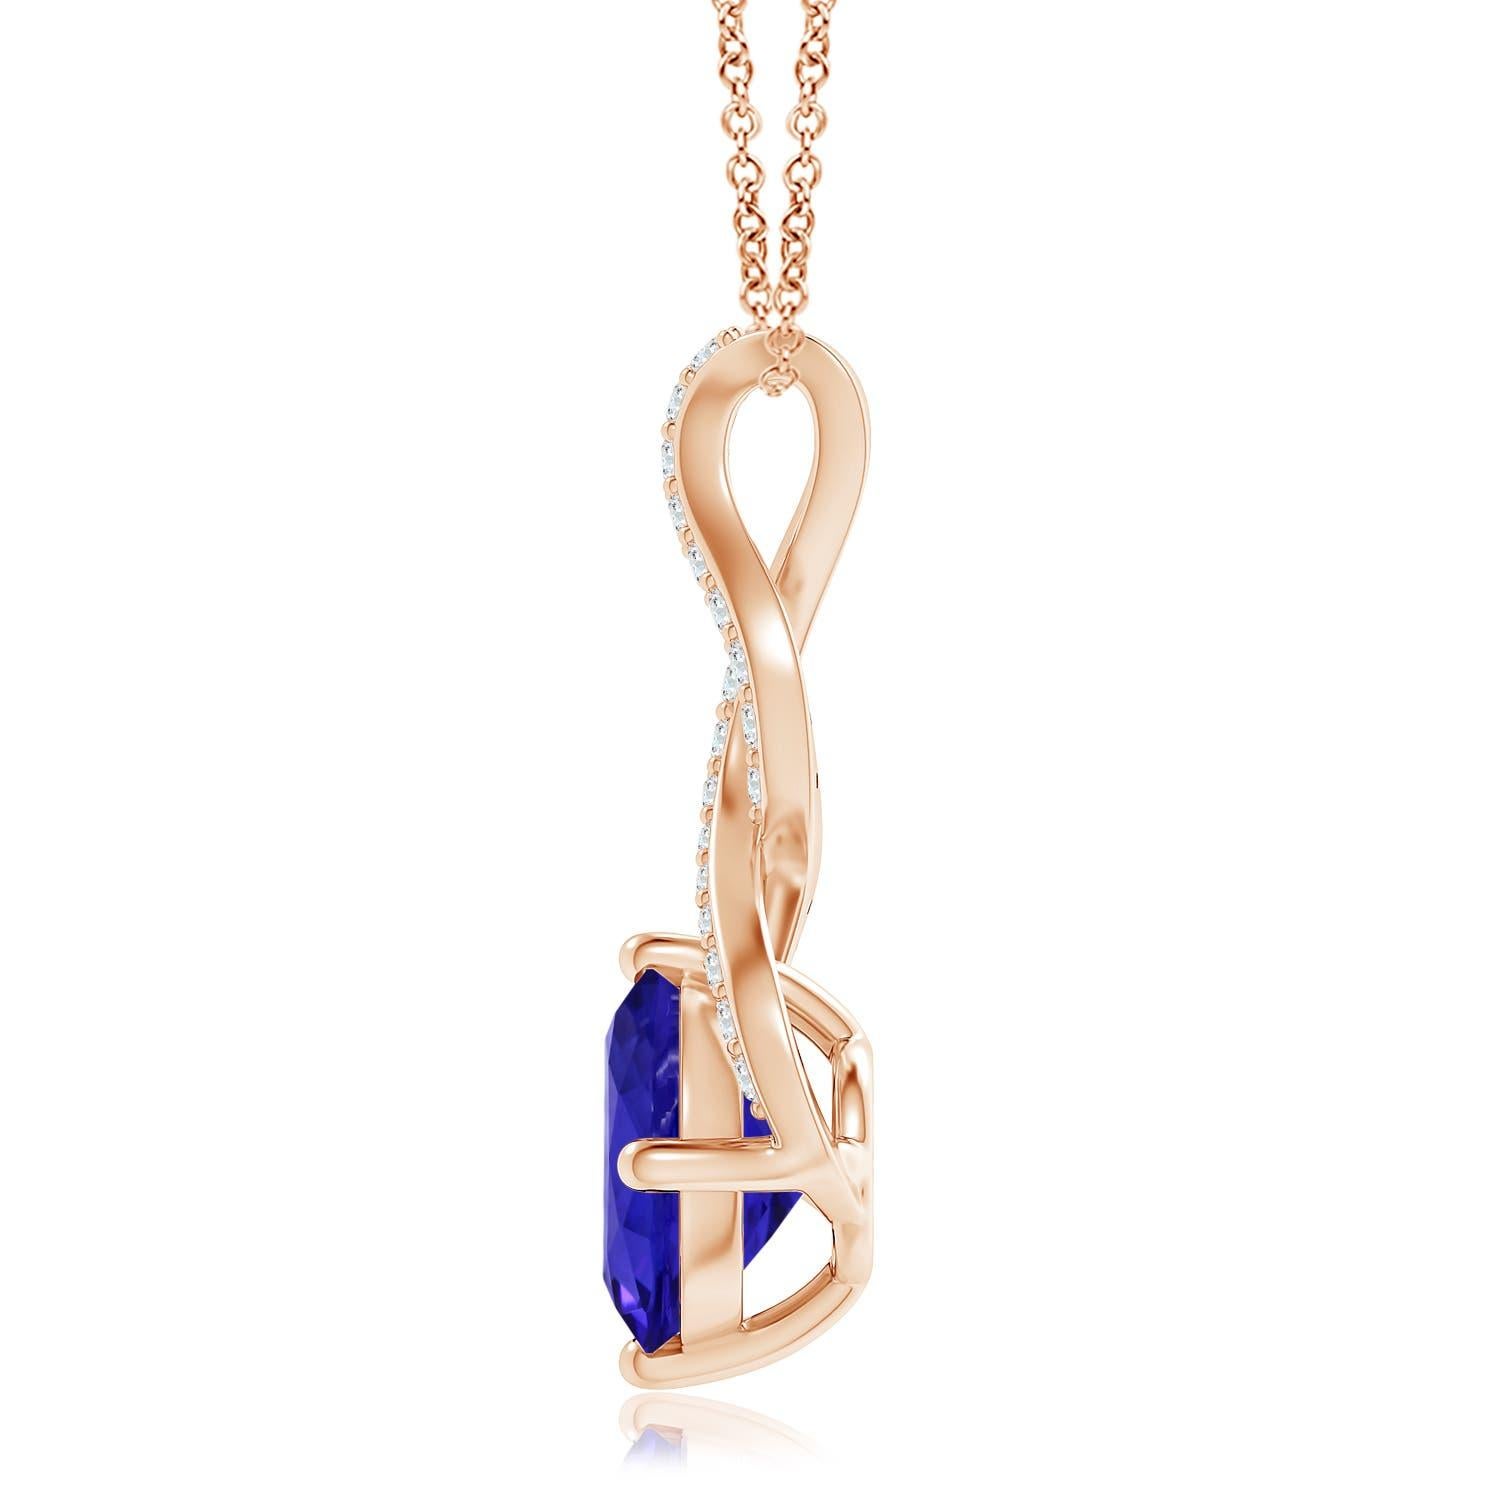 A beautiful interpretation of the iconic infinity sign, this 14k rose gold tanzanite pendant features a dazzling infinity-shaped bale. The prong-set GIA certified tanzanite is accentuated by the brilliant diamonds on the twisted bale.
